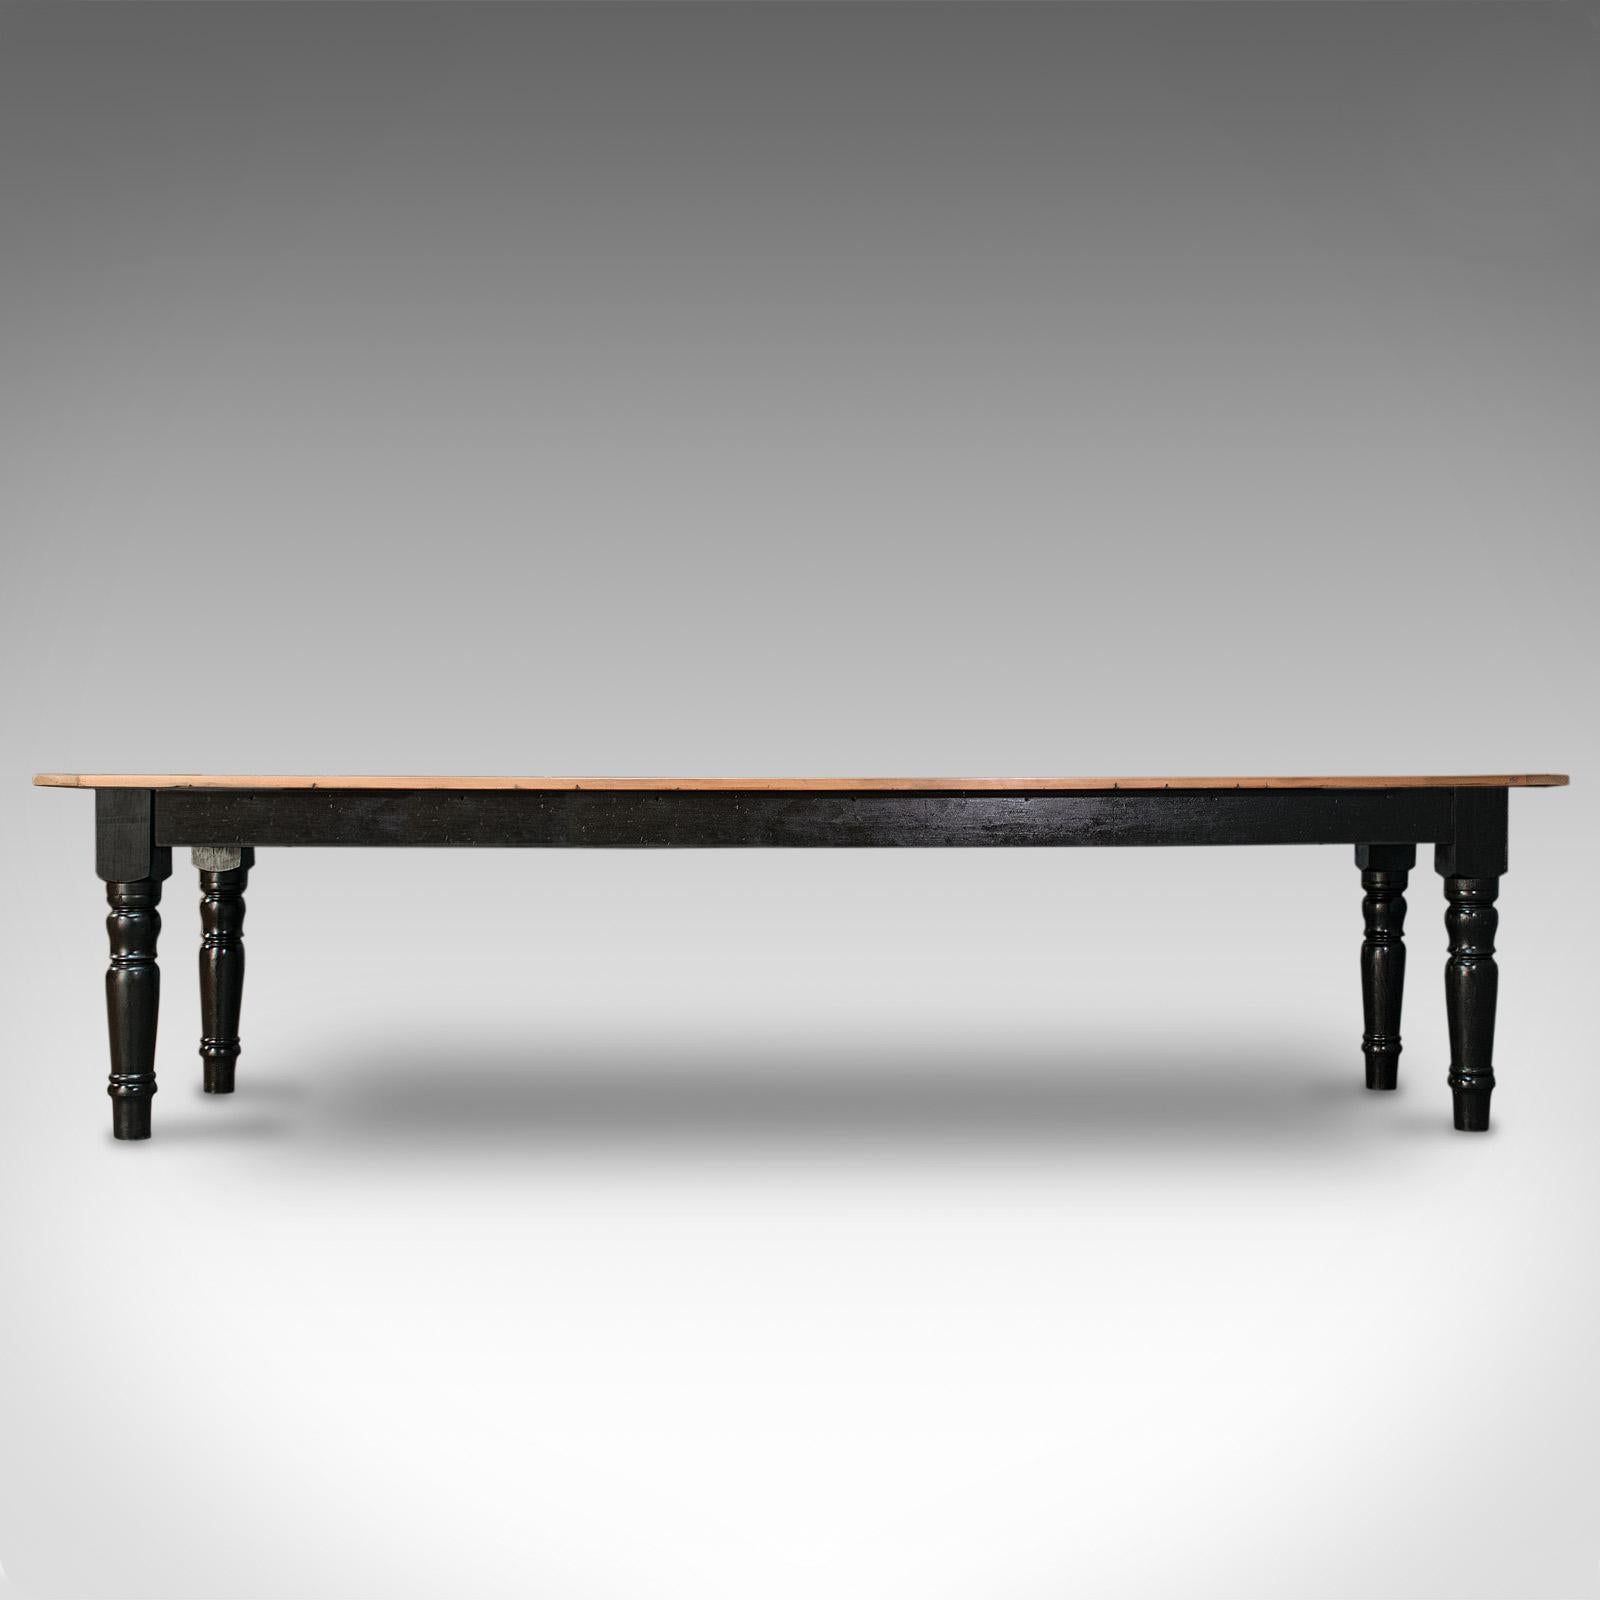 This is a large antique farmhouse dining table. An English, pine and traditionally ebonised pine kitchen or country house table for 10-12 people, dating to the Victorian period and later, circa 1900.

Wonderfully proportioned for the large family